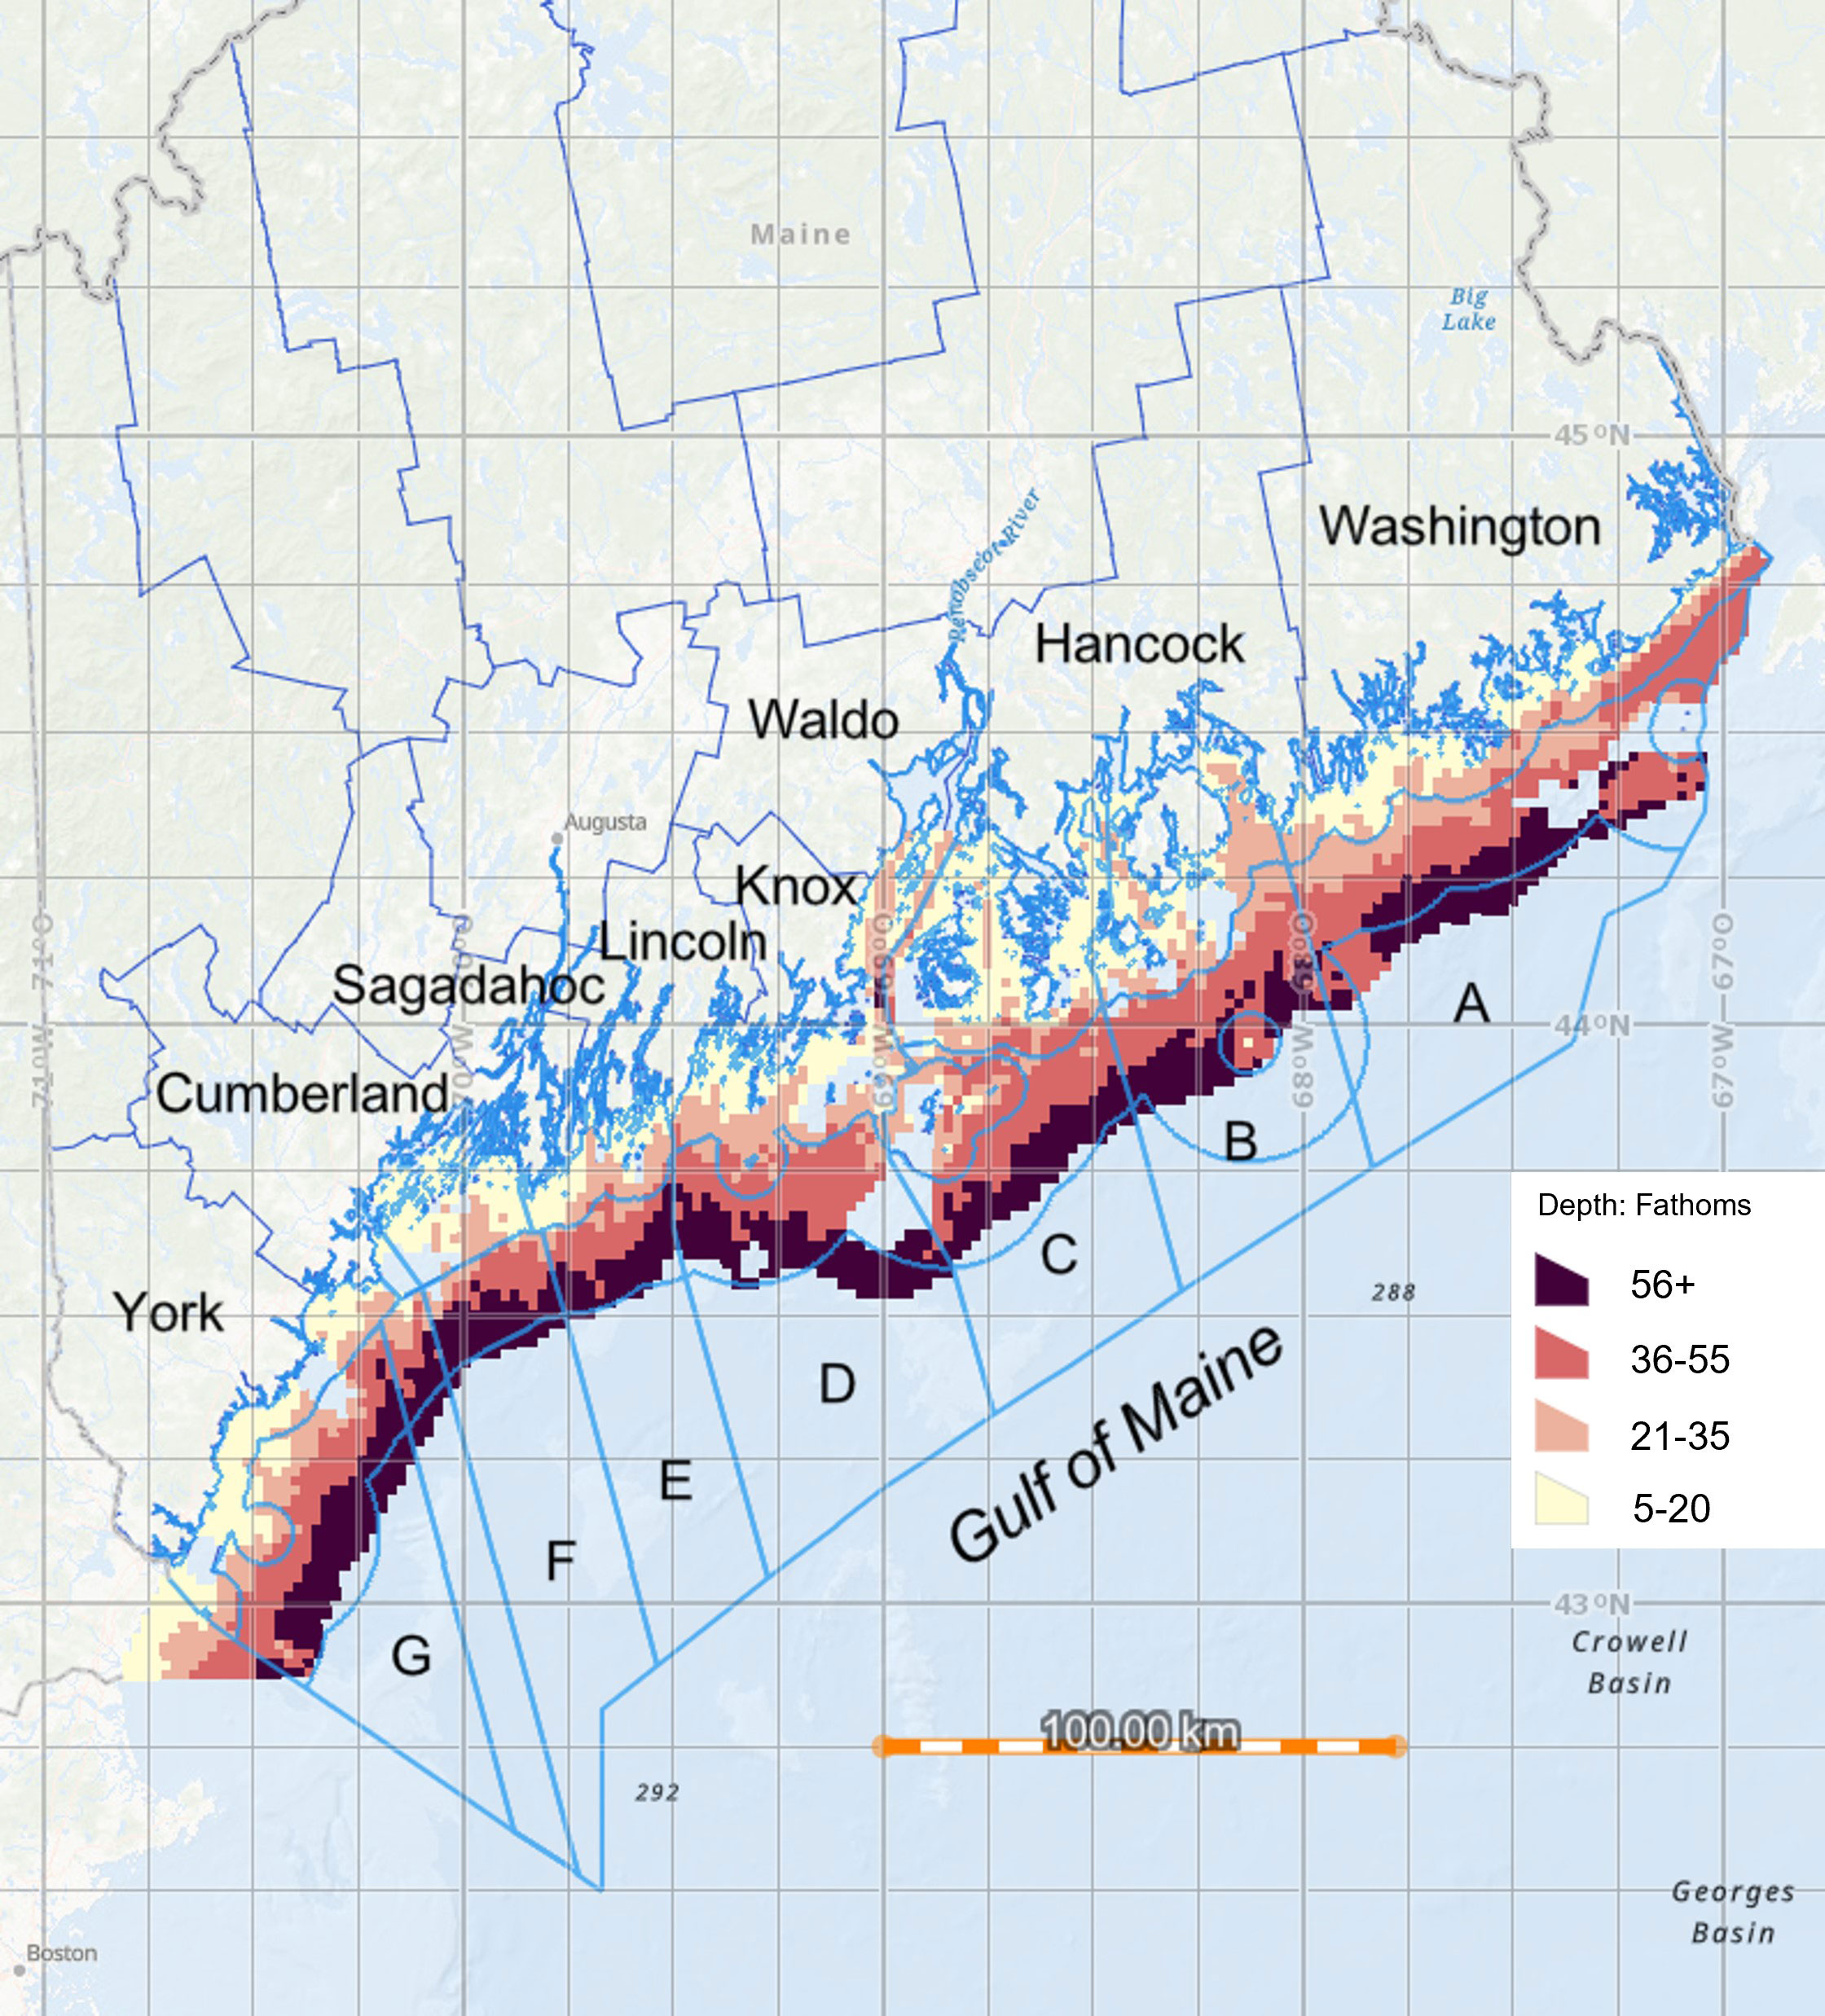 100 years of data shows warming from climate change in Boothbay Harbor